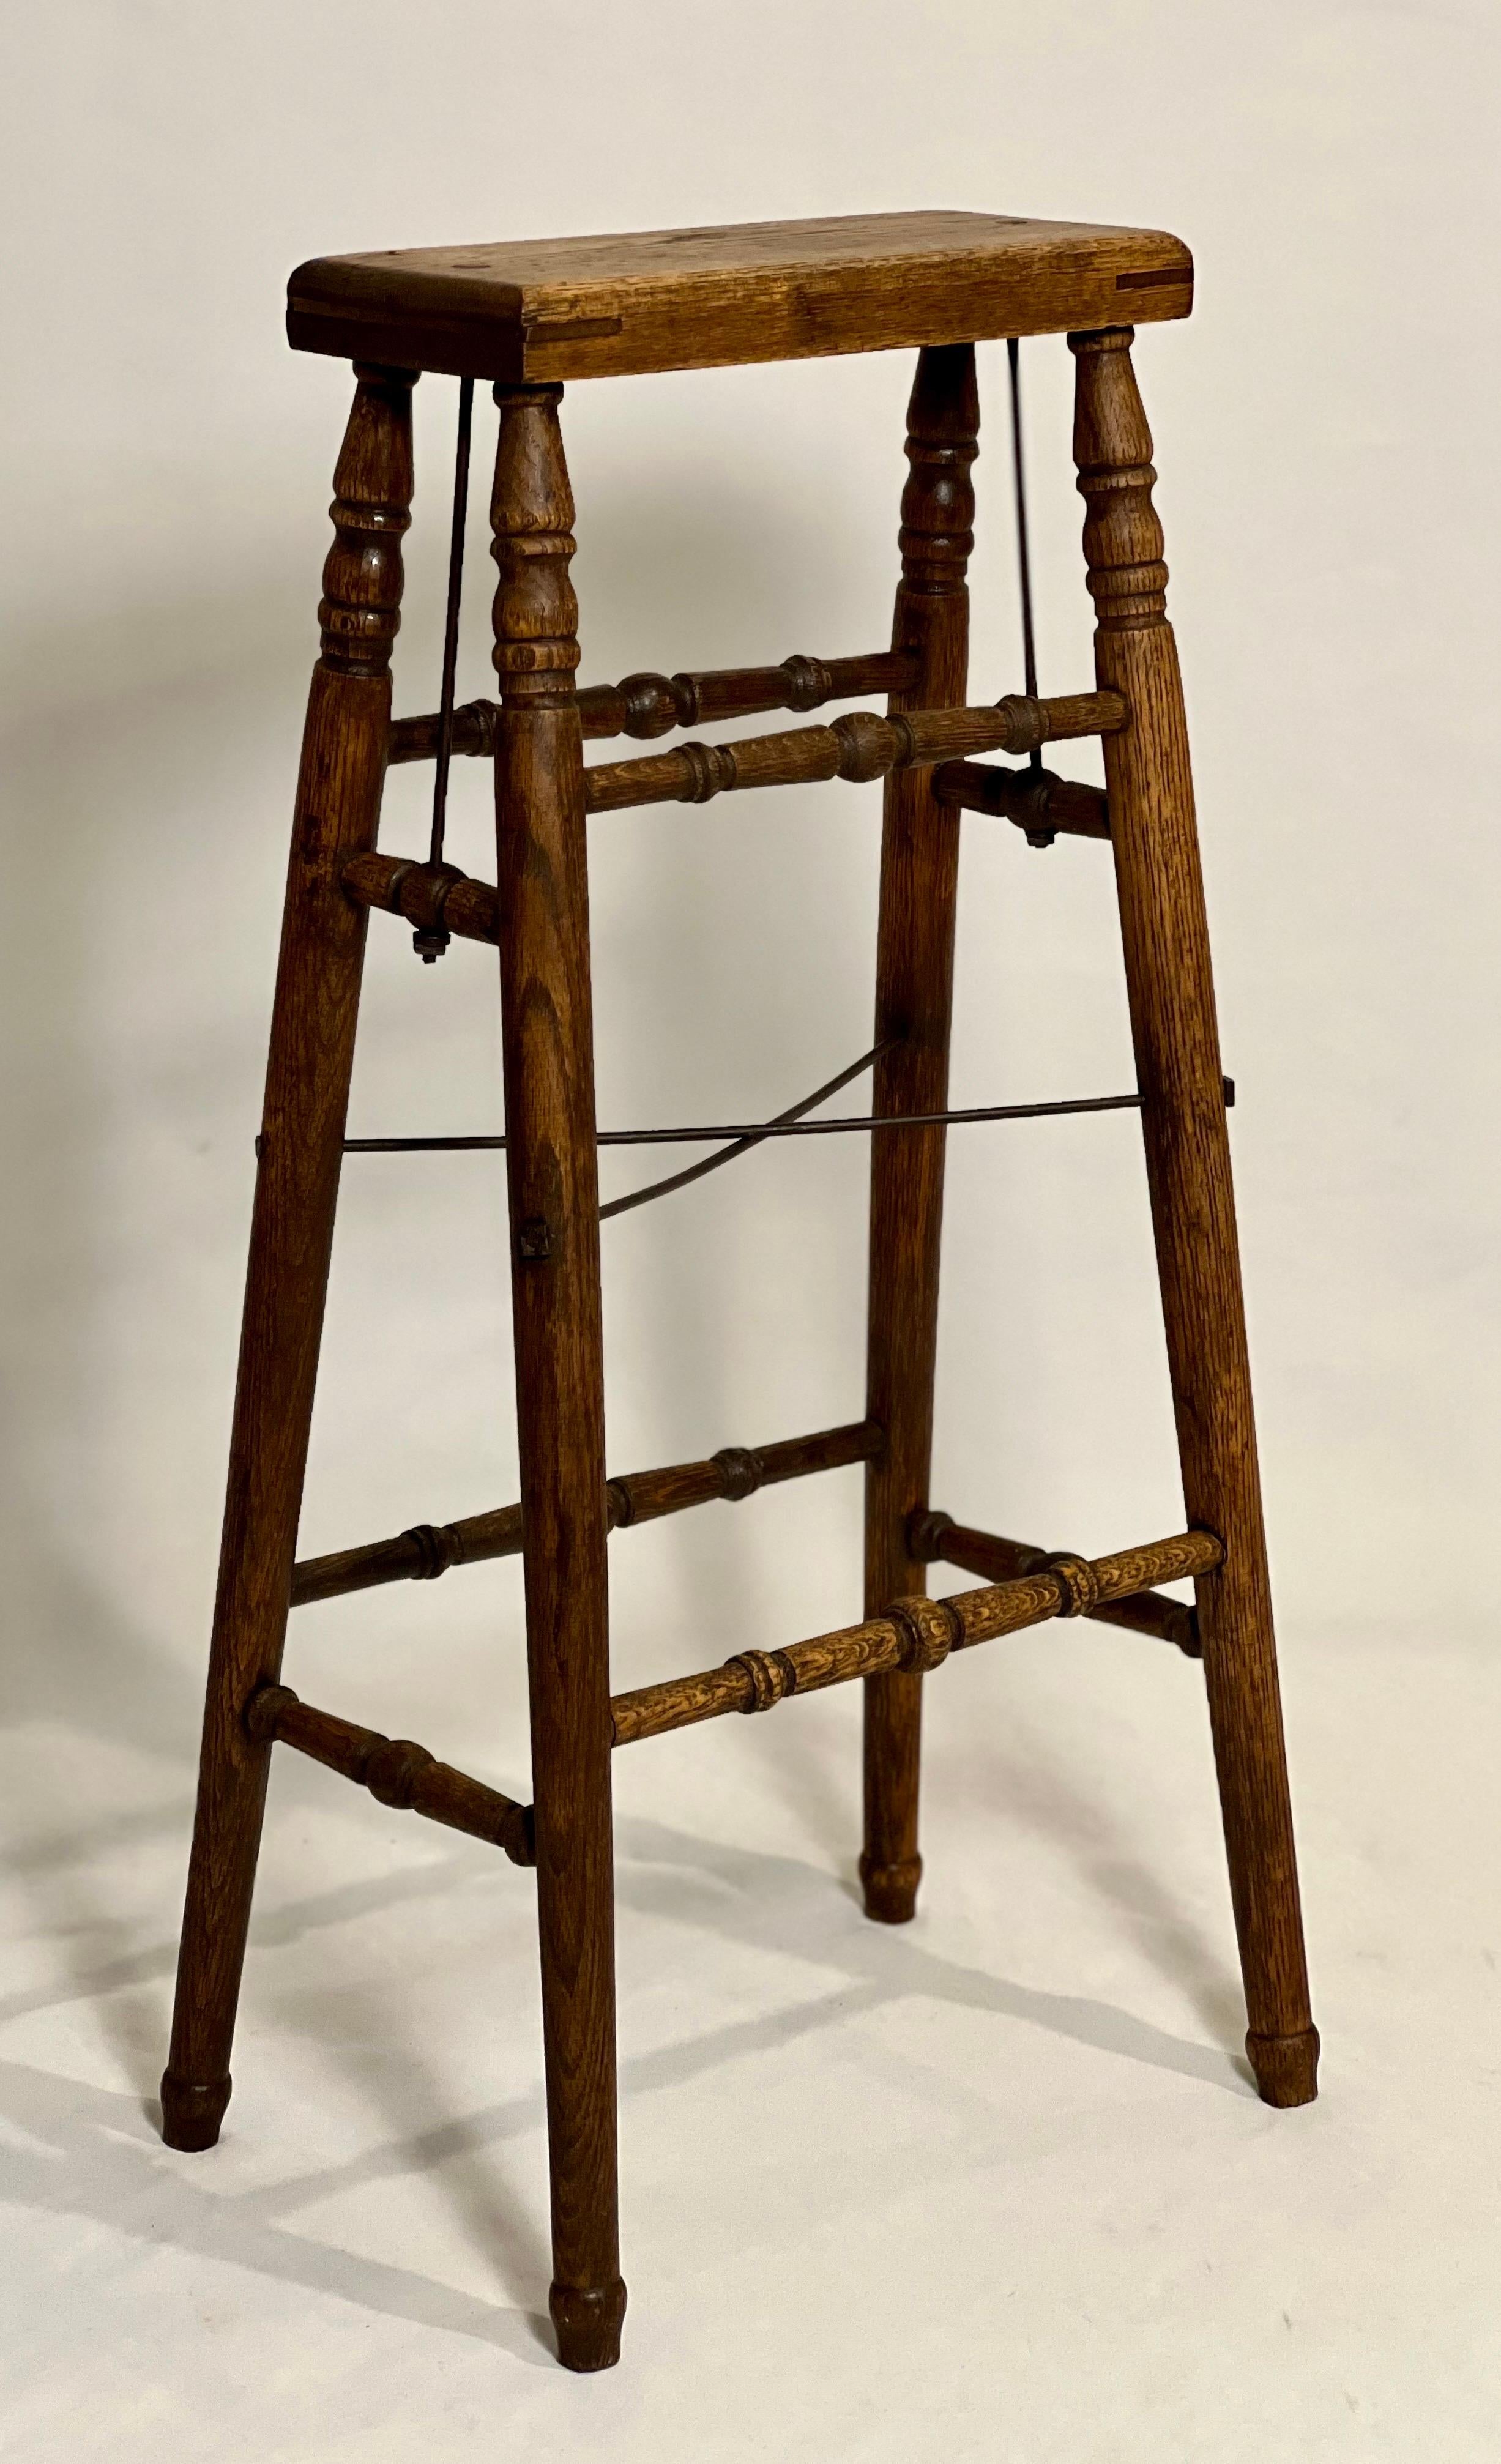 Antique oak and iron artist's stand or stool, France circa 1850s.

A rare style oak artist's stand with nicely turned legs and iron reinforcements. The complexity of the base is uniquely beautiful. The industrial element of the iron artfully